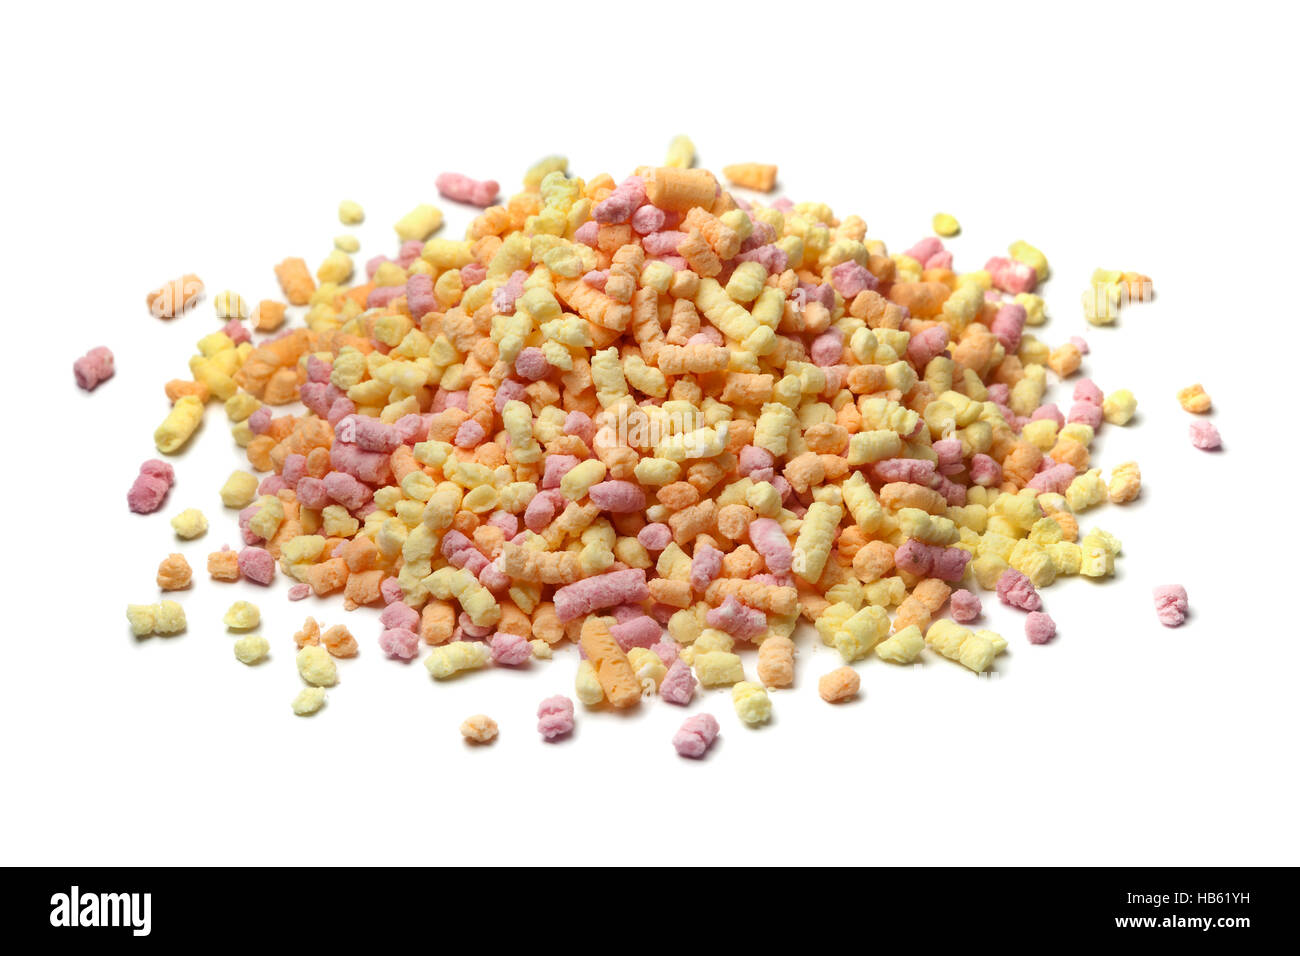 Heap of colored sprinkles on white background Stock Photo